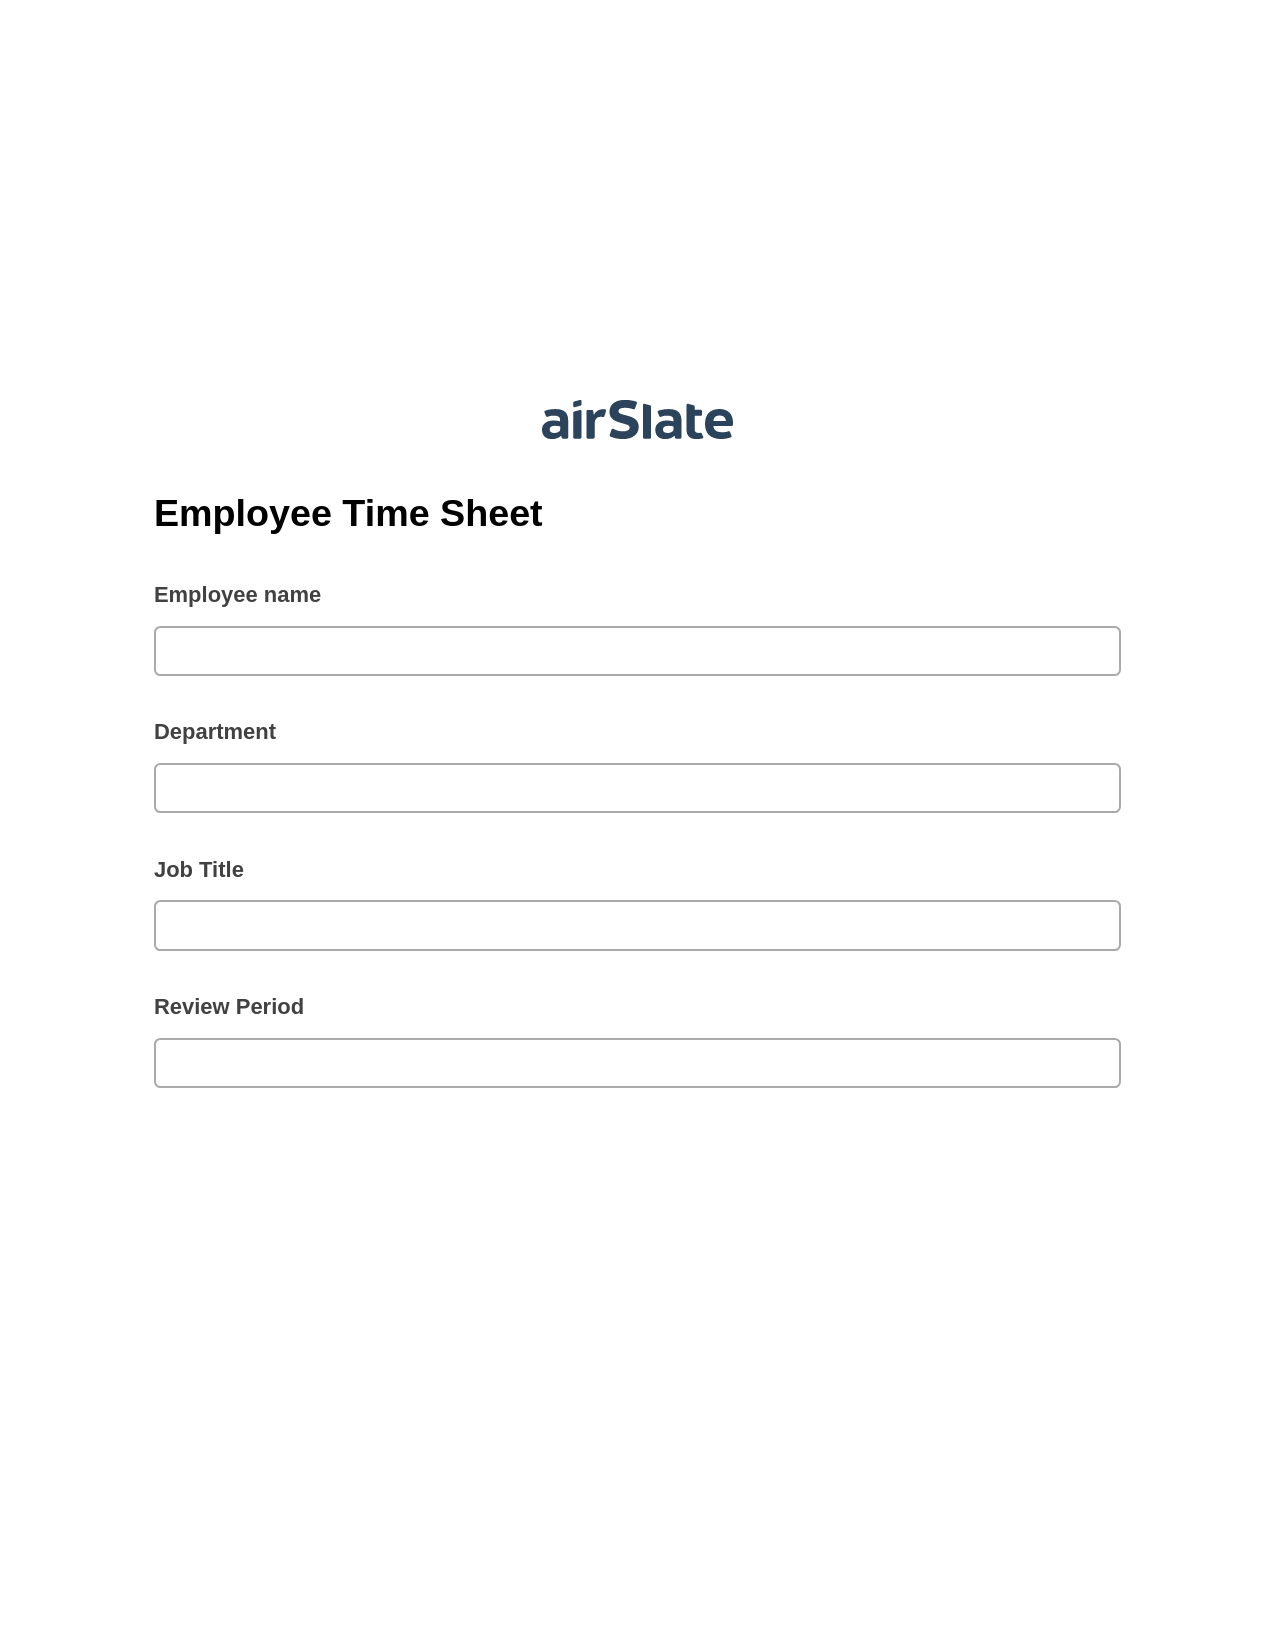 Employee Time Sheet Pre-fill from Excel Spreadsheet Bot, Set signature type addon, Export to WebMerge Bot